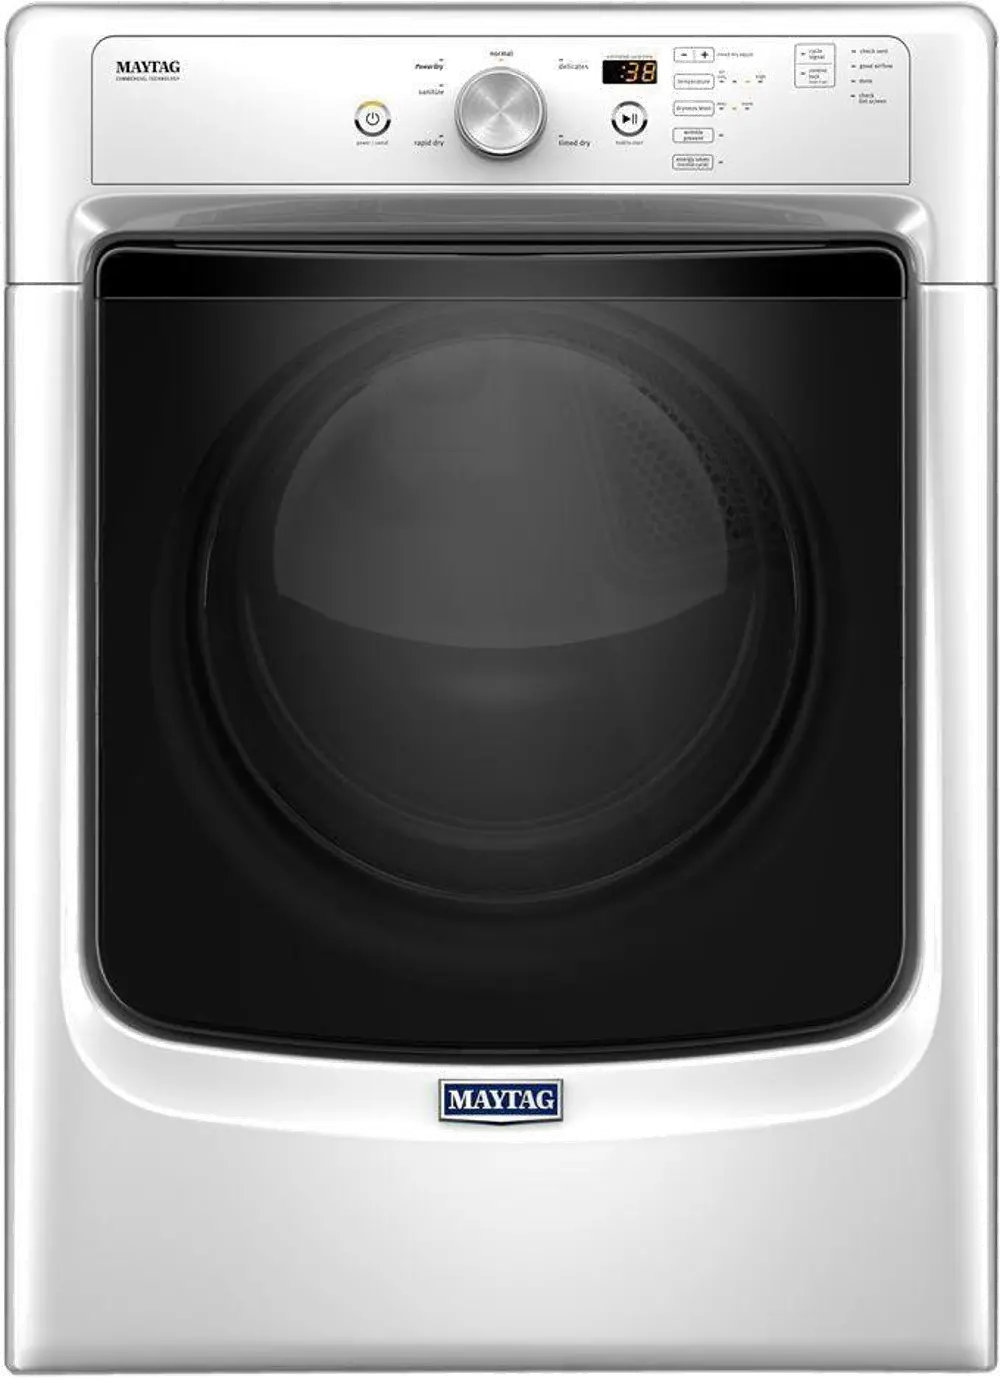 MED3500FW Maytag Electric Dryer - 7.4 cu. ft. White-1